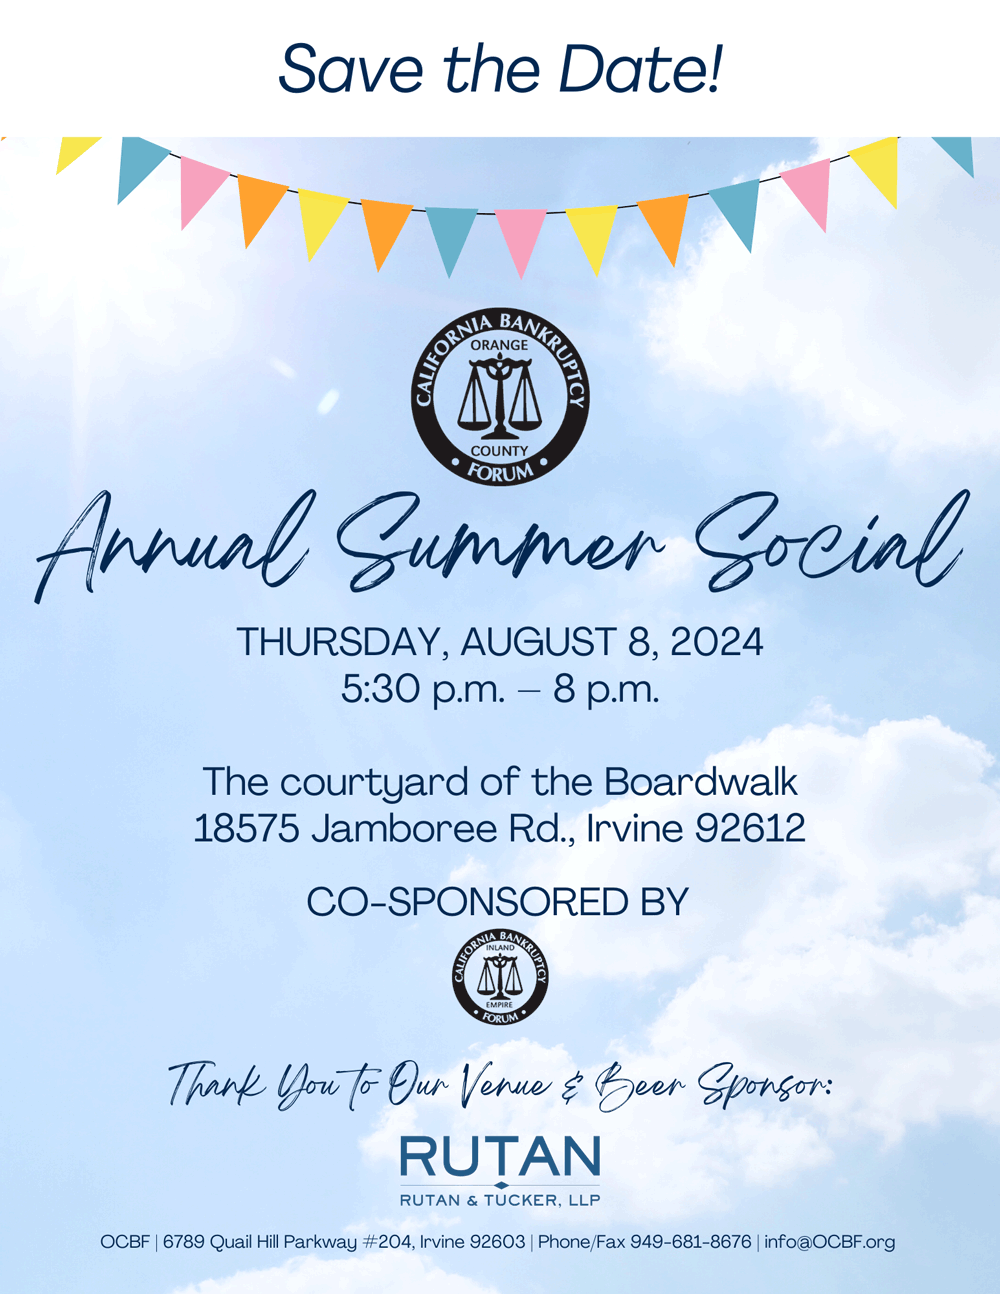 Save the Date! Summer Social on Aug. 8, 2024